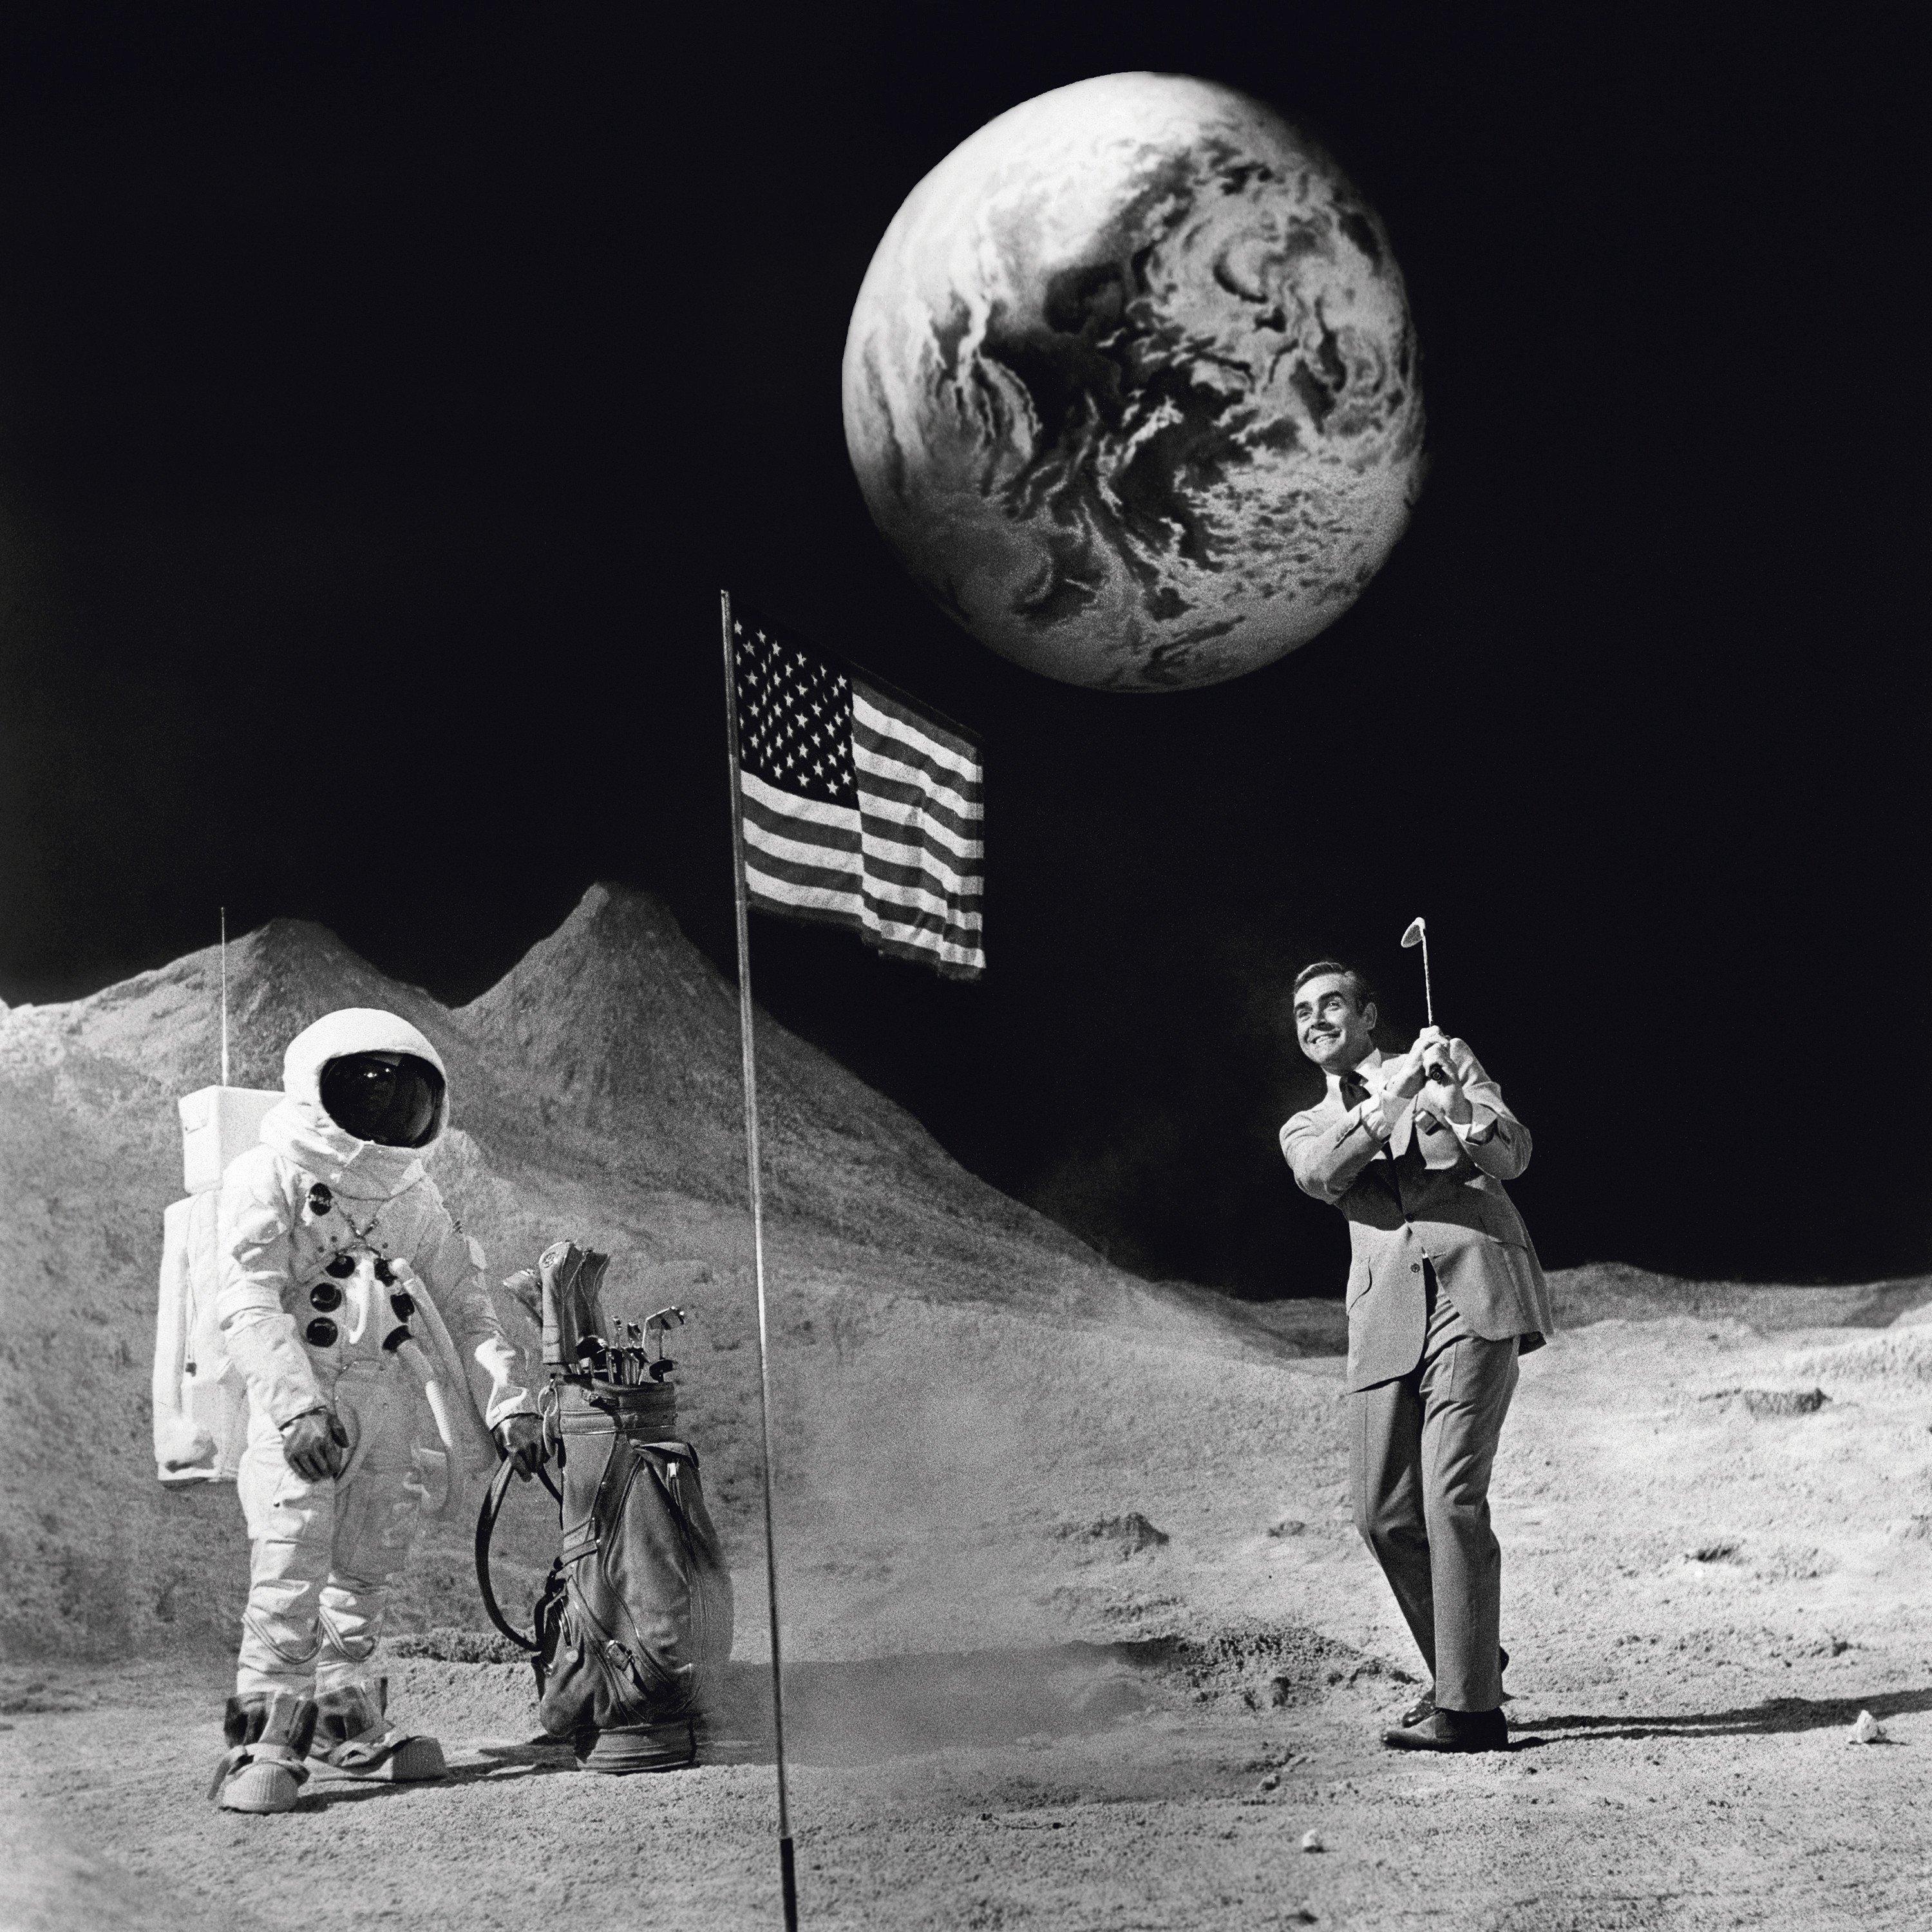 Sean Connery on the Moon, 1971
Silver Gelatin Print
Estate signature stamped and numbered edition of 50
with certificate of authenticity

Re-creating astronaut Alan Shepard’s famed golfing on the moon picture, Connery as James Bond plays golf on a